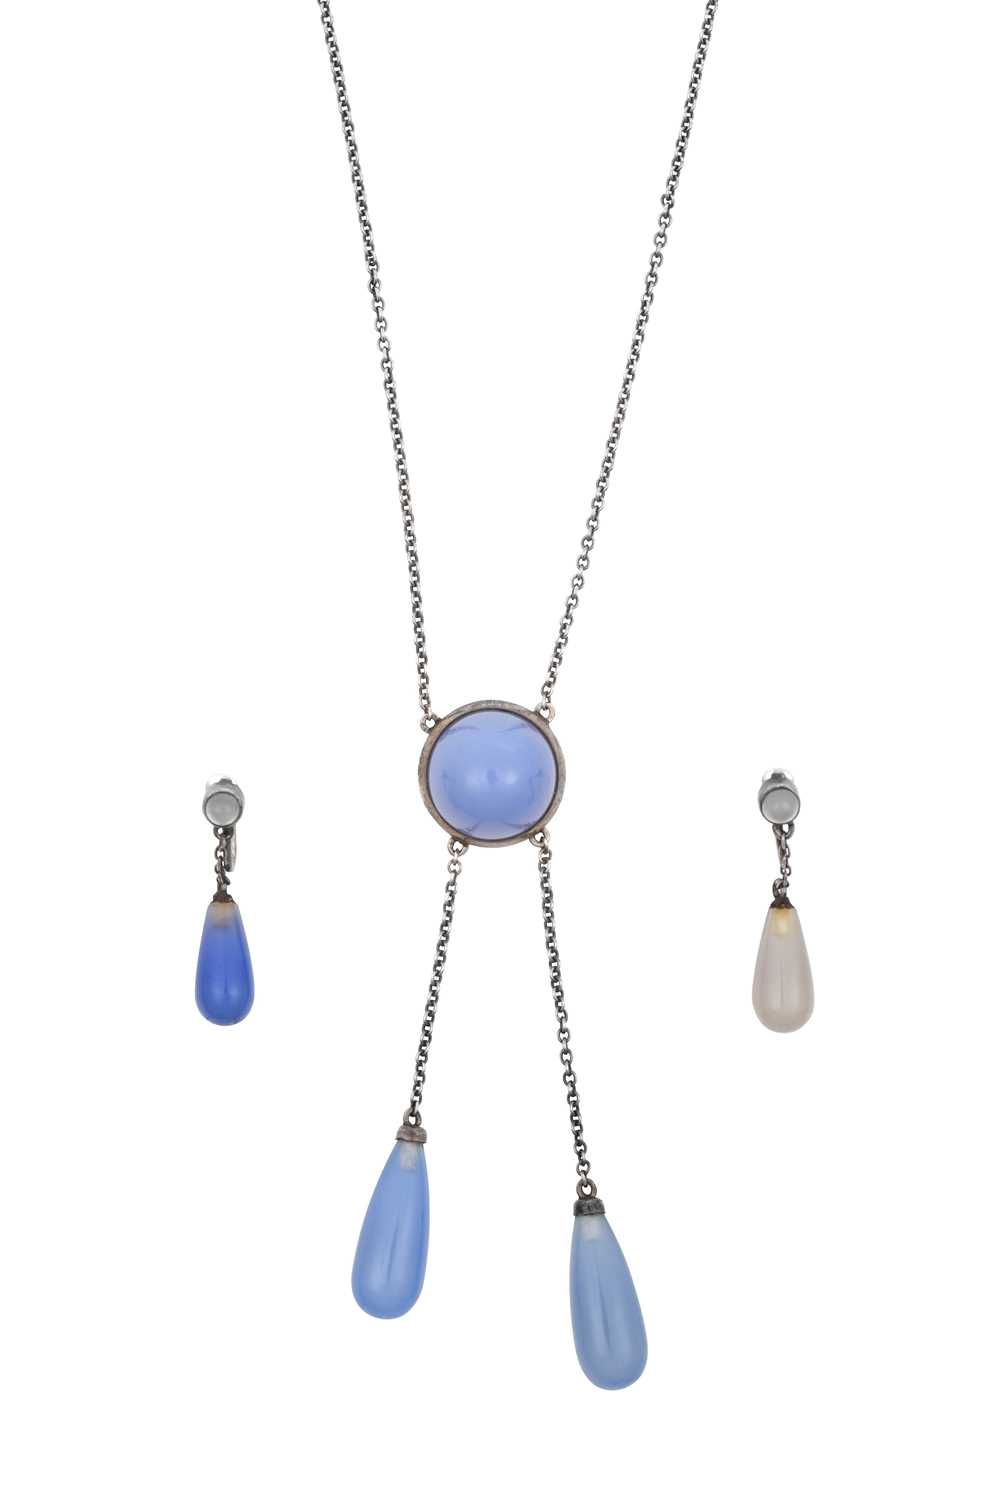 An Early 20th Century Chalcedony Négligée Necklace and A Pair of Chalcedony Drop Earrings the